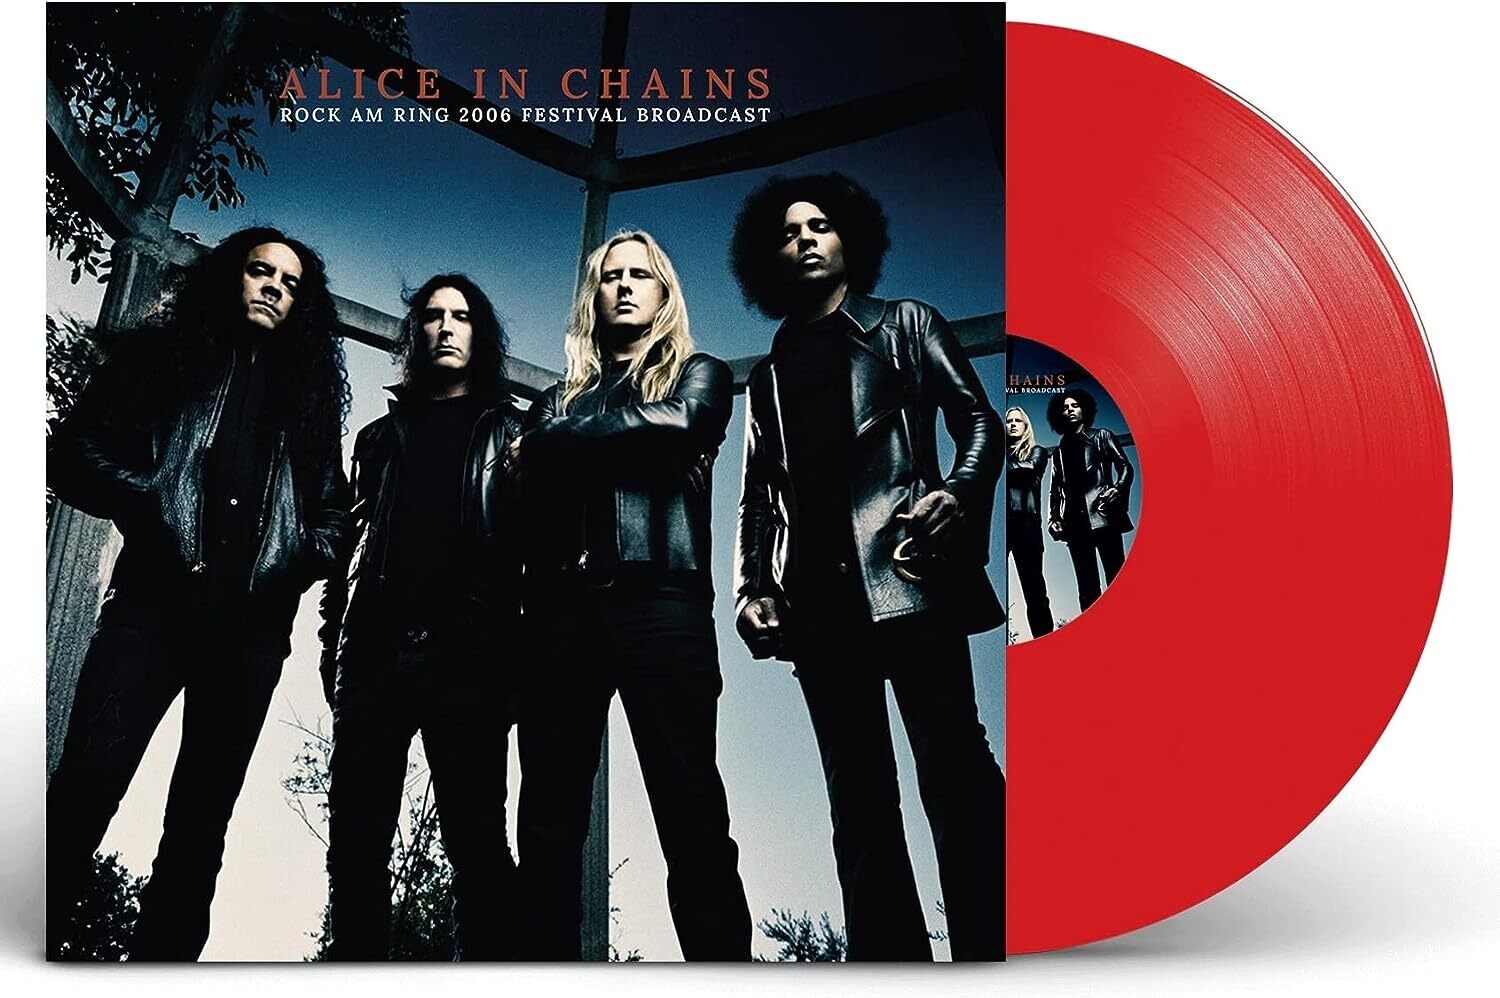 Alice in Chains Rock Am Ring : 2006 Festival Broadcast (Vinyle) - Photo 1 sur 1